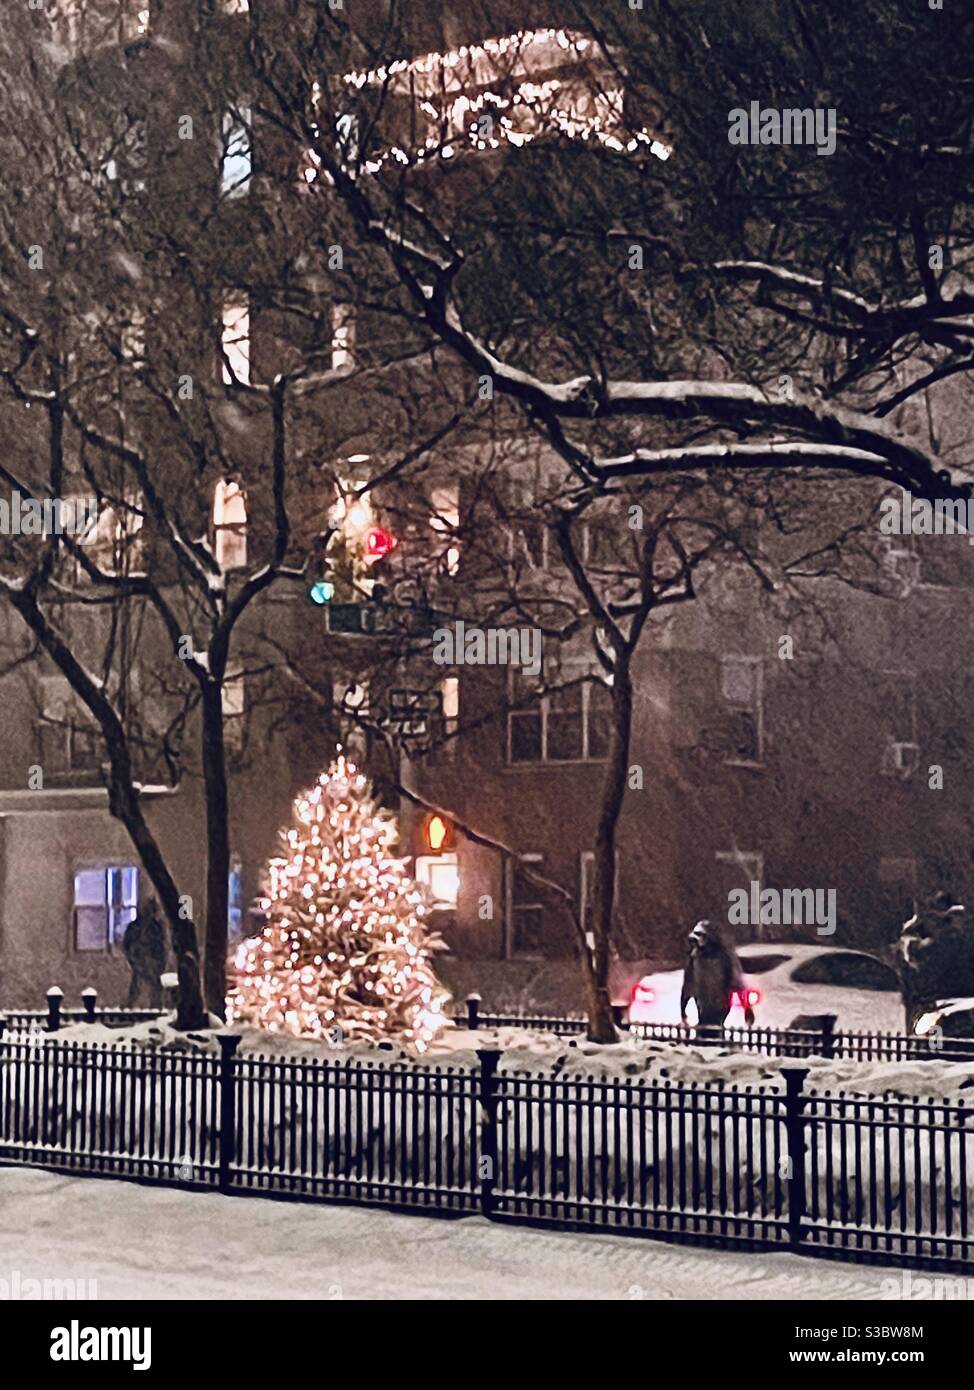 A person walking by Christmas lights on a Christmas tree and on a terrace at the corner of Park Avenue & 36th Street at night as snow falls in New York City, silhouetting tree branches and parked cars Stock Photo